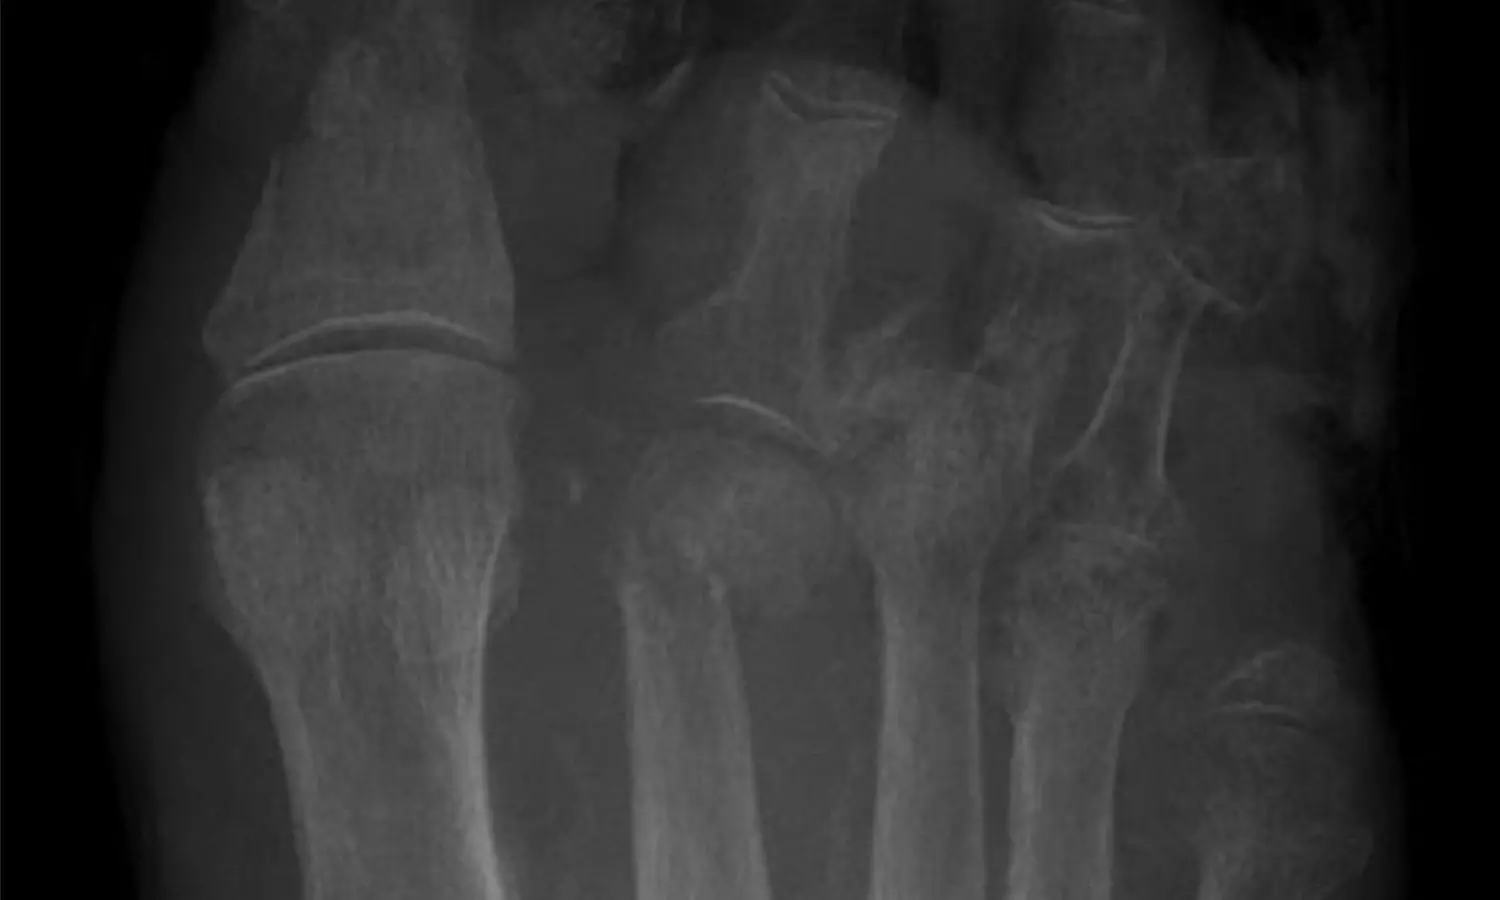 Clinical outcomes of Tightrope system in the treatment of purely ligamentous Lisfranc injuries